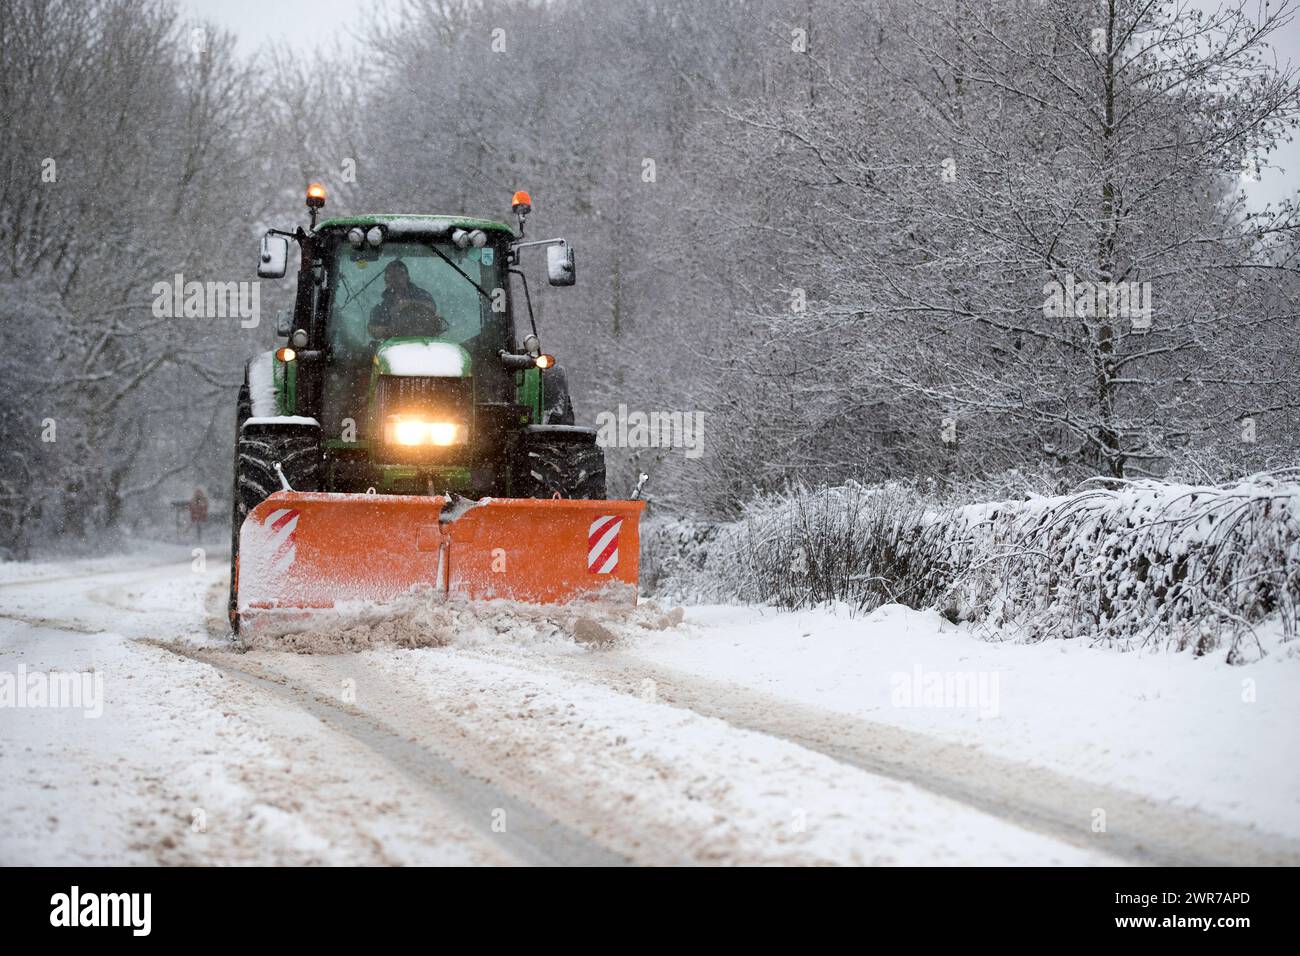 29/12/17  A tractor with a snow plough clears the A515 near Biggin, Derbyshire. Stock Photo